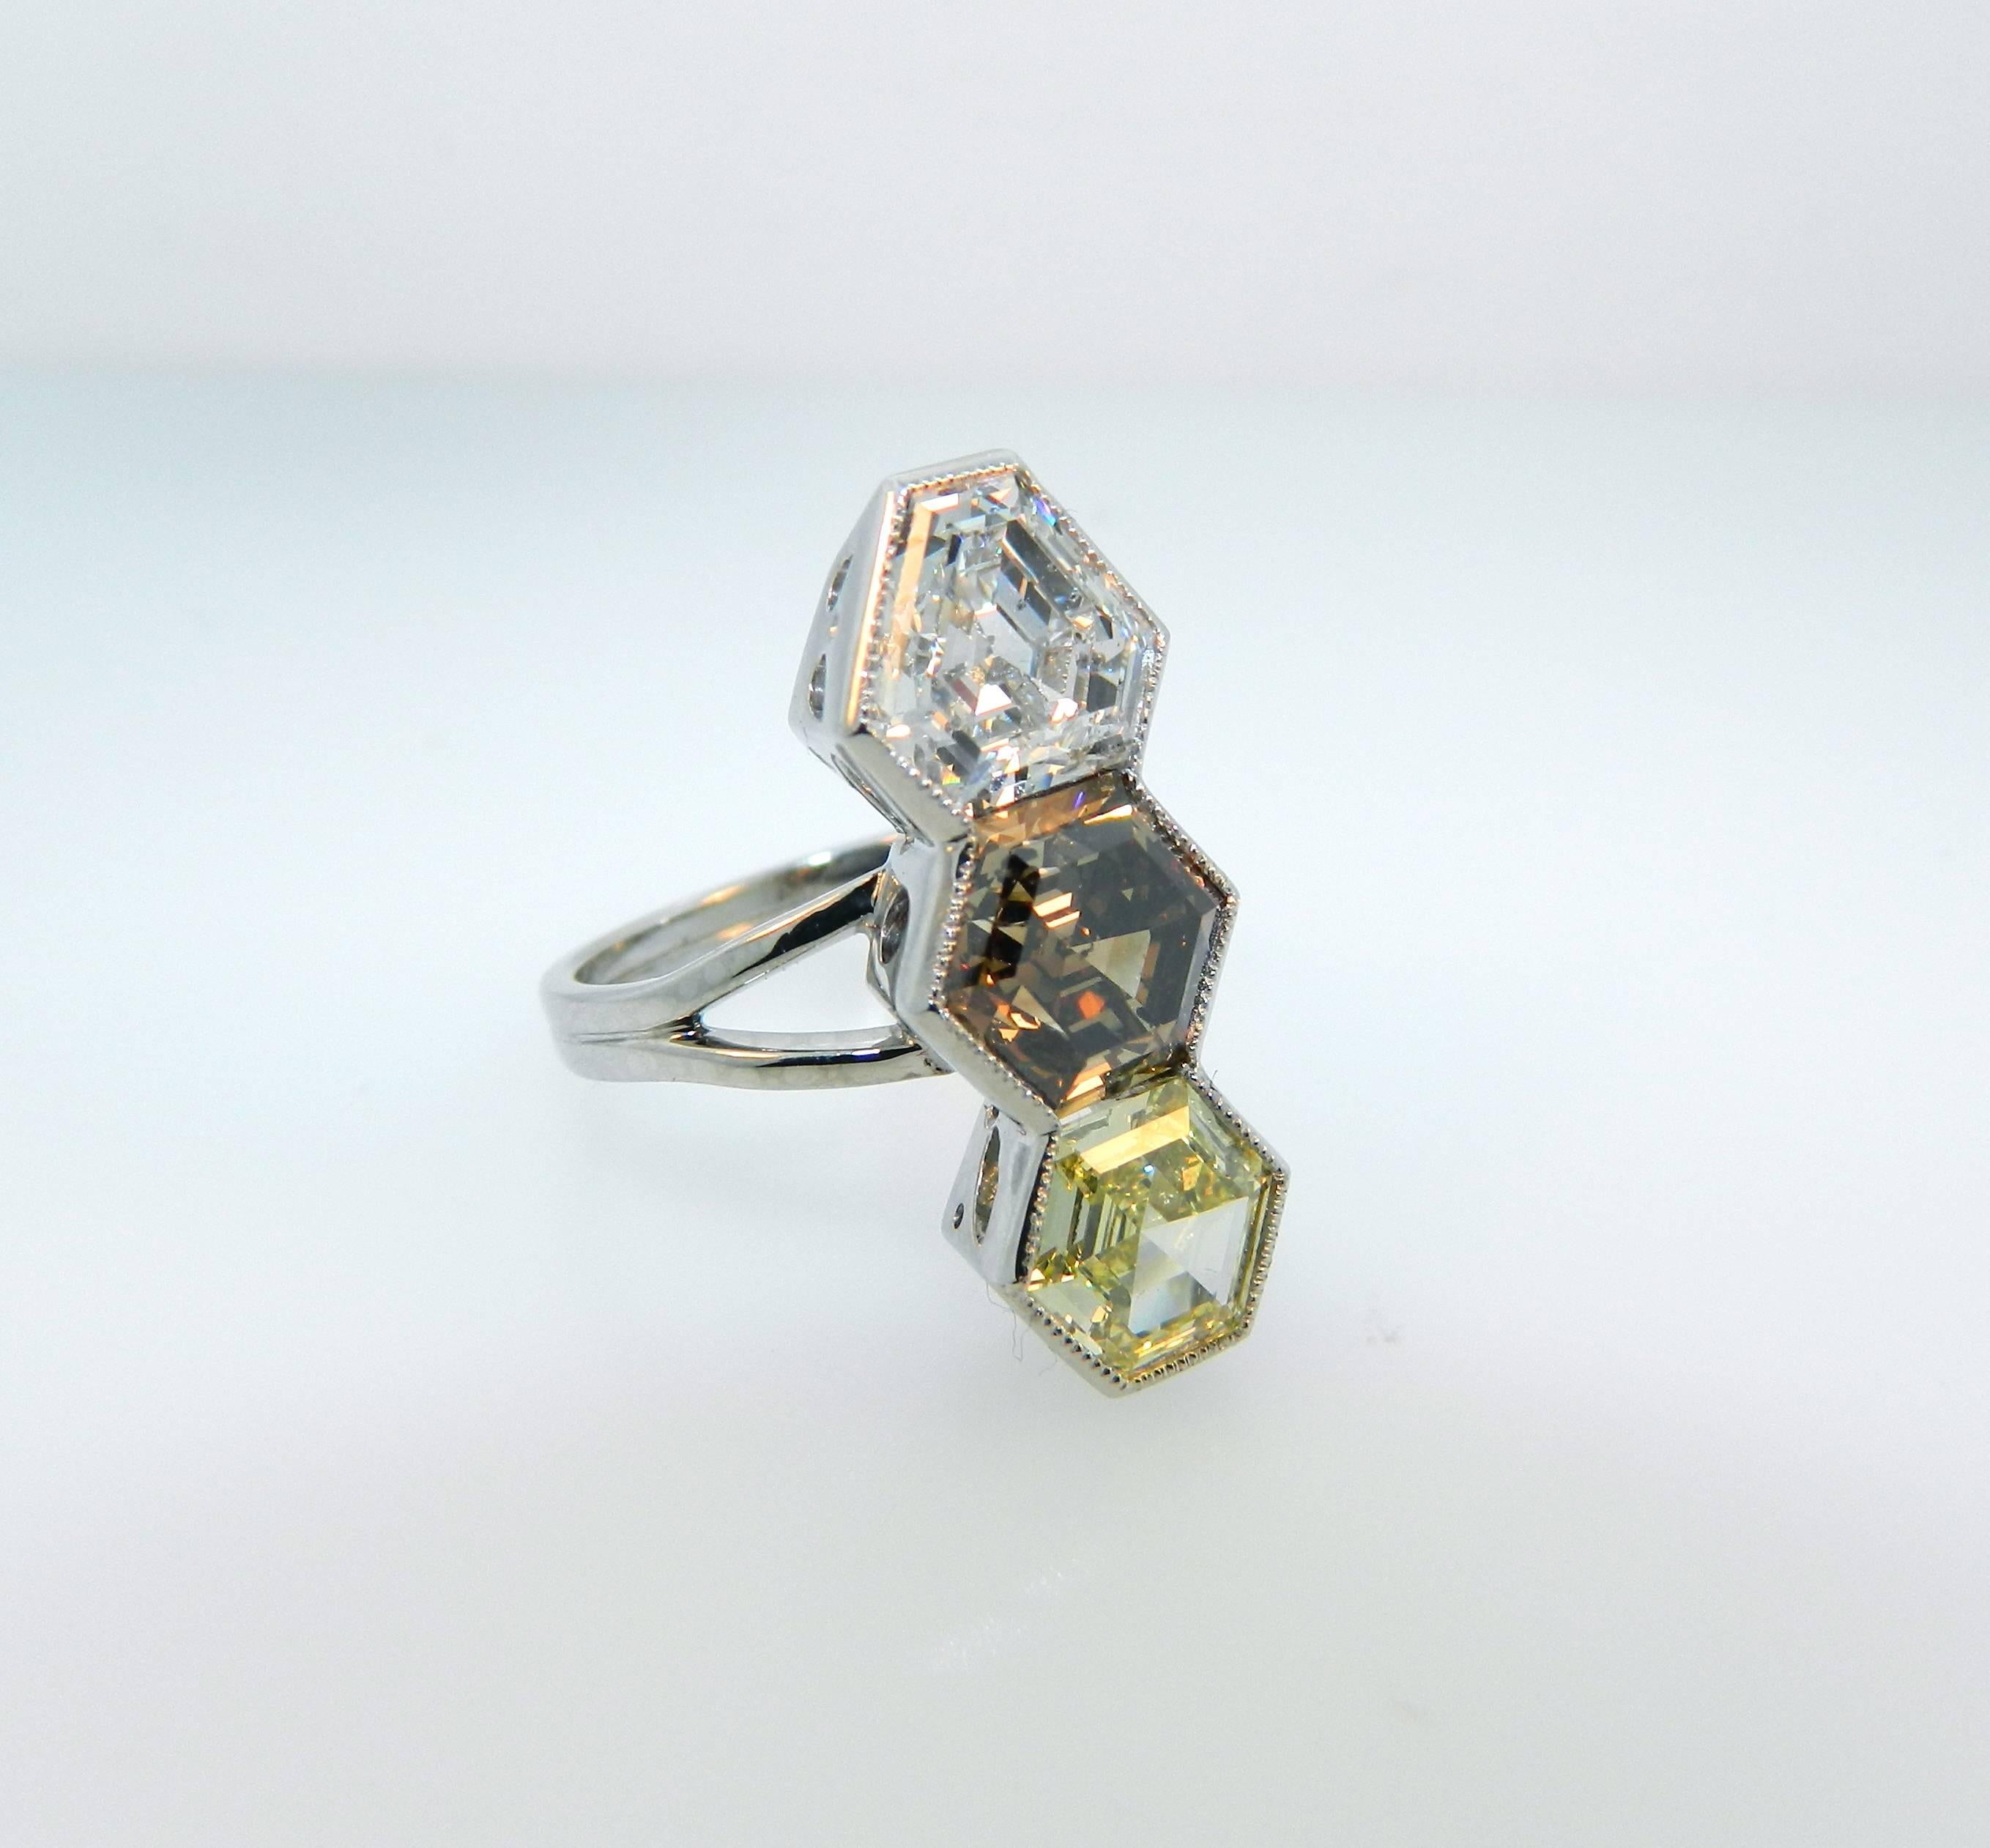 A rare and stunning Hartz & Co Geometric cocktail ring.  This gorgeous ring features a GIA certified 2.30ct E SI1 Modified Shield Step Cut, a 3.01ct Natural Fancy Orangey Brown Hexagonal Step Cut and a GIA certified 1.36ct Natural Fancy Yellow